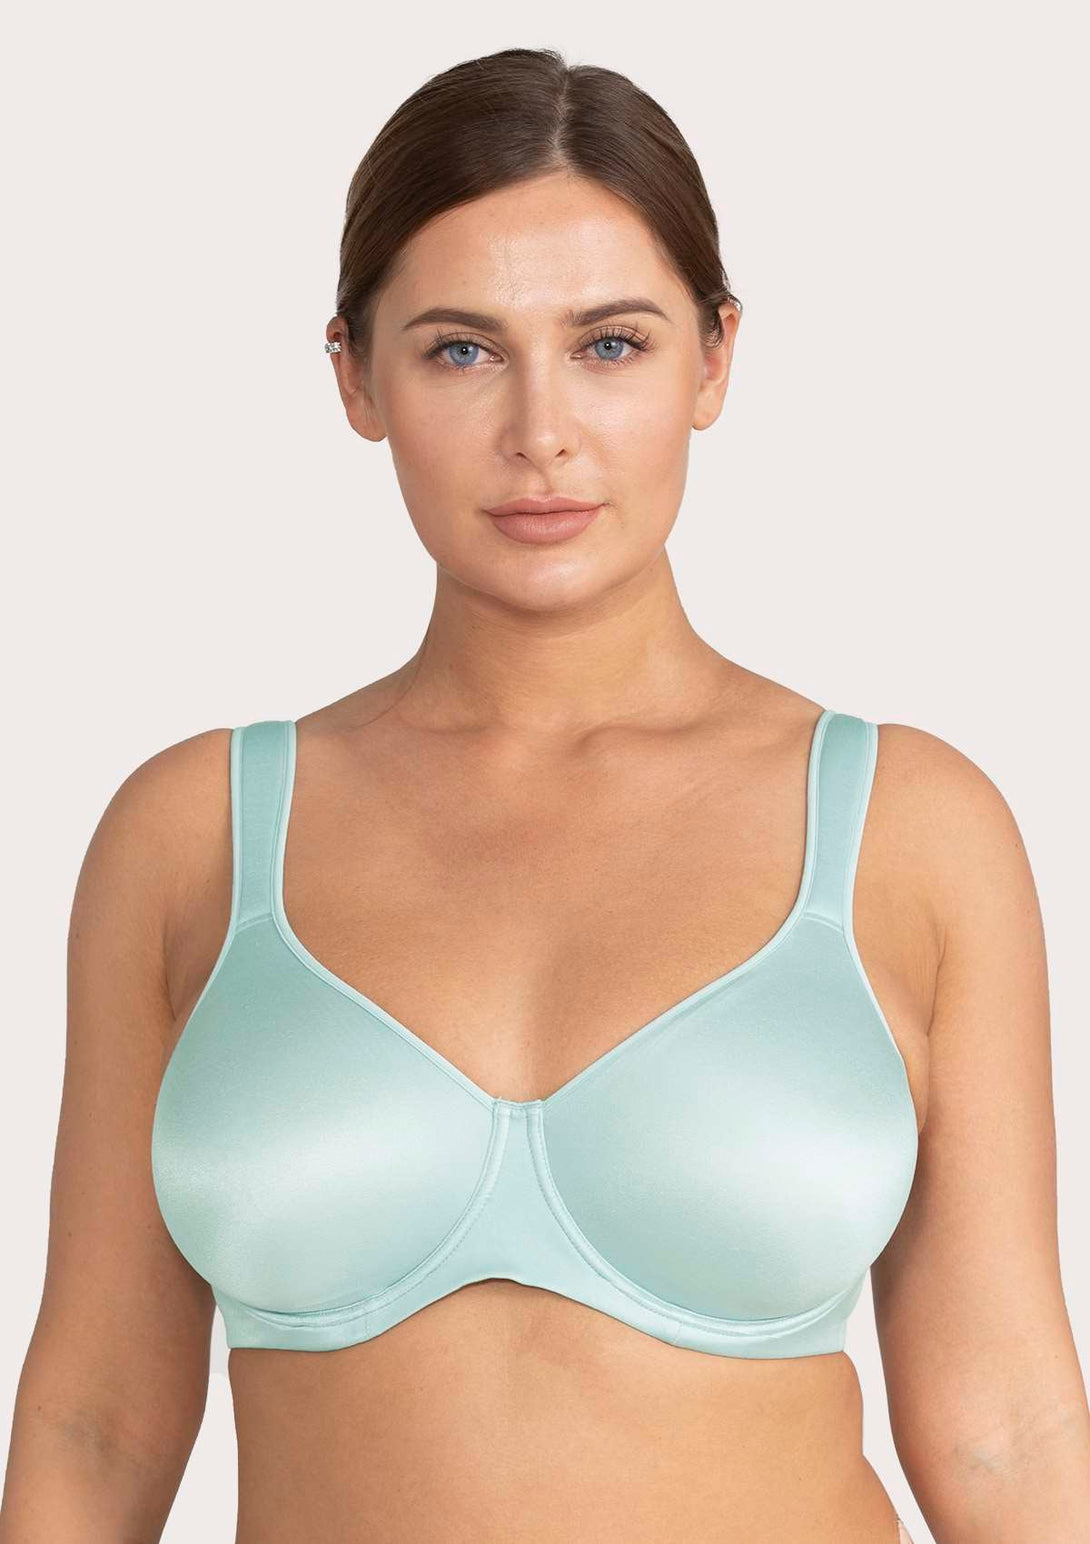 AILIVIN Underwire Bras for Women Minimizer Unlined Lace Full